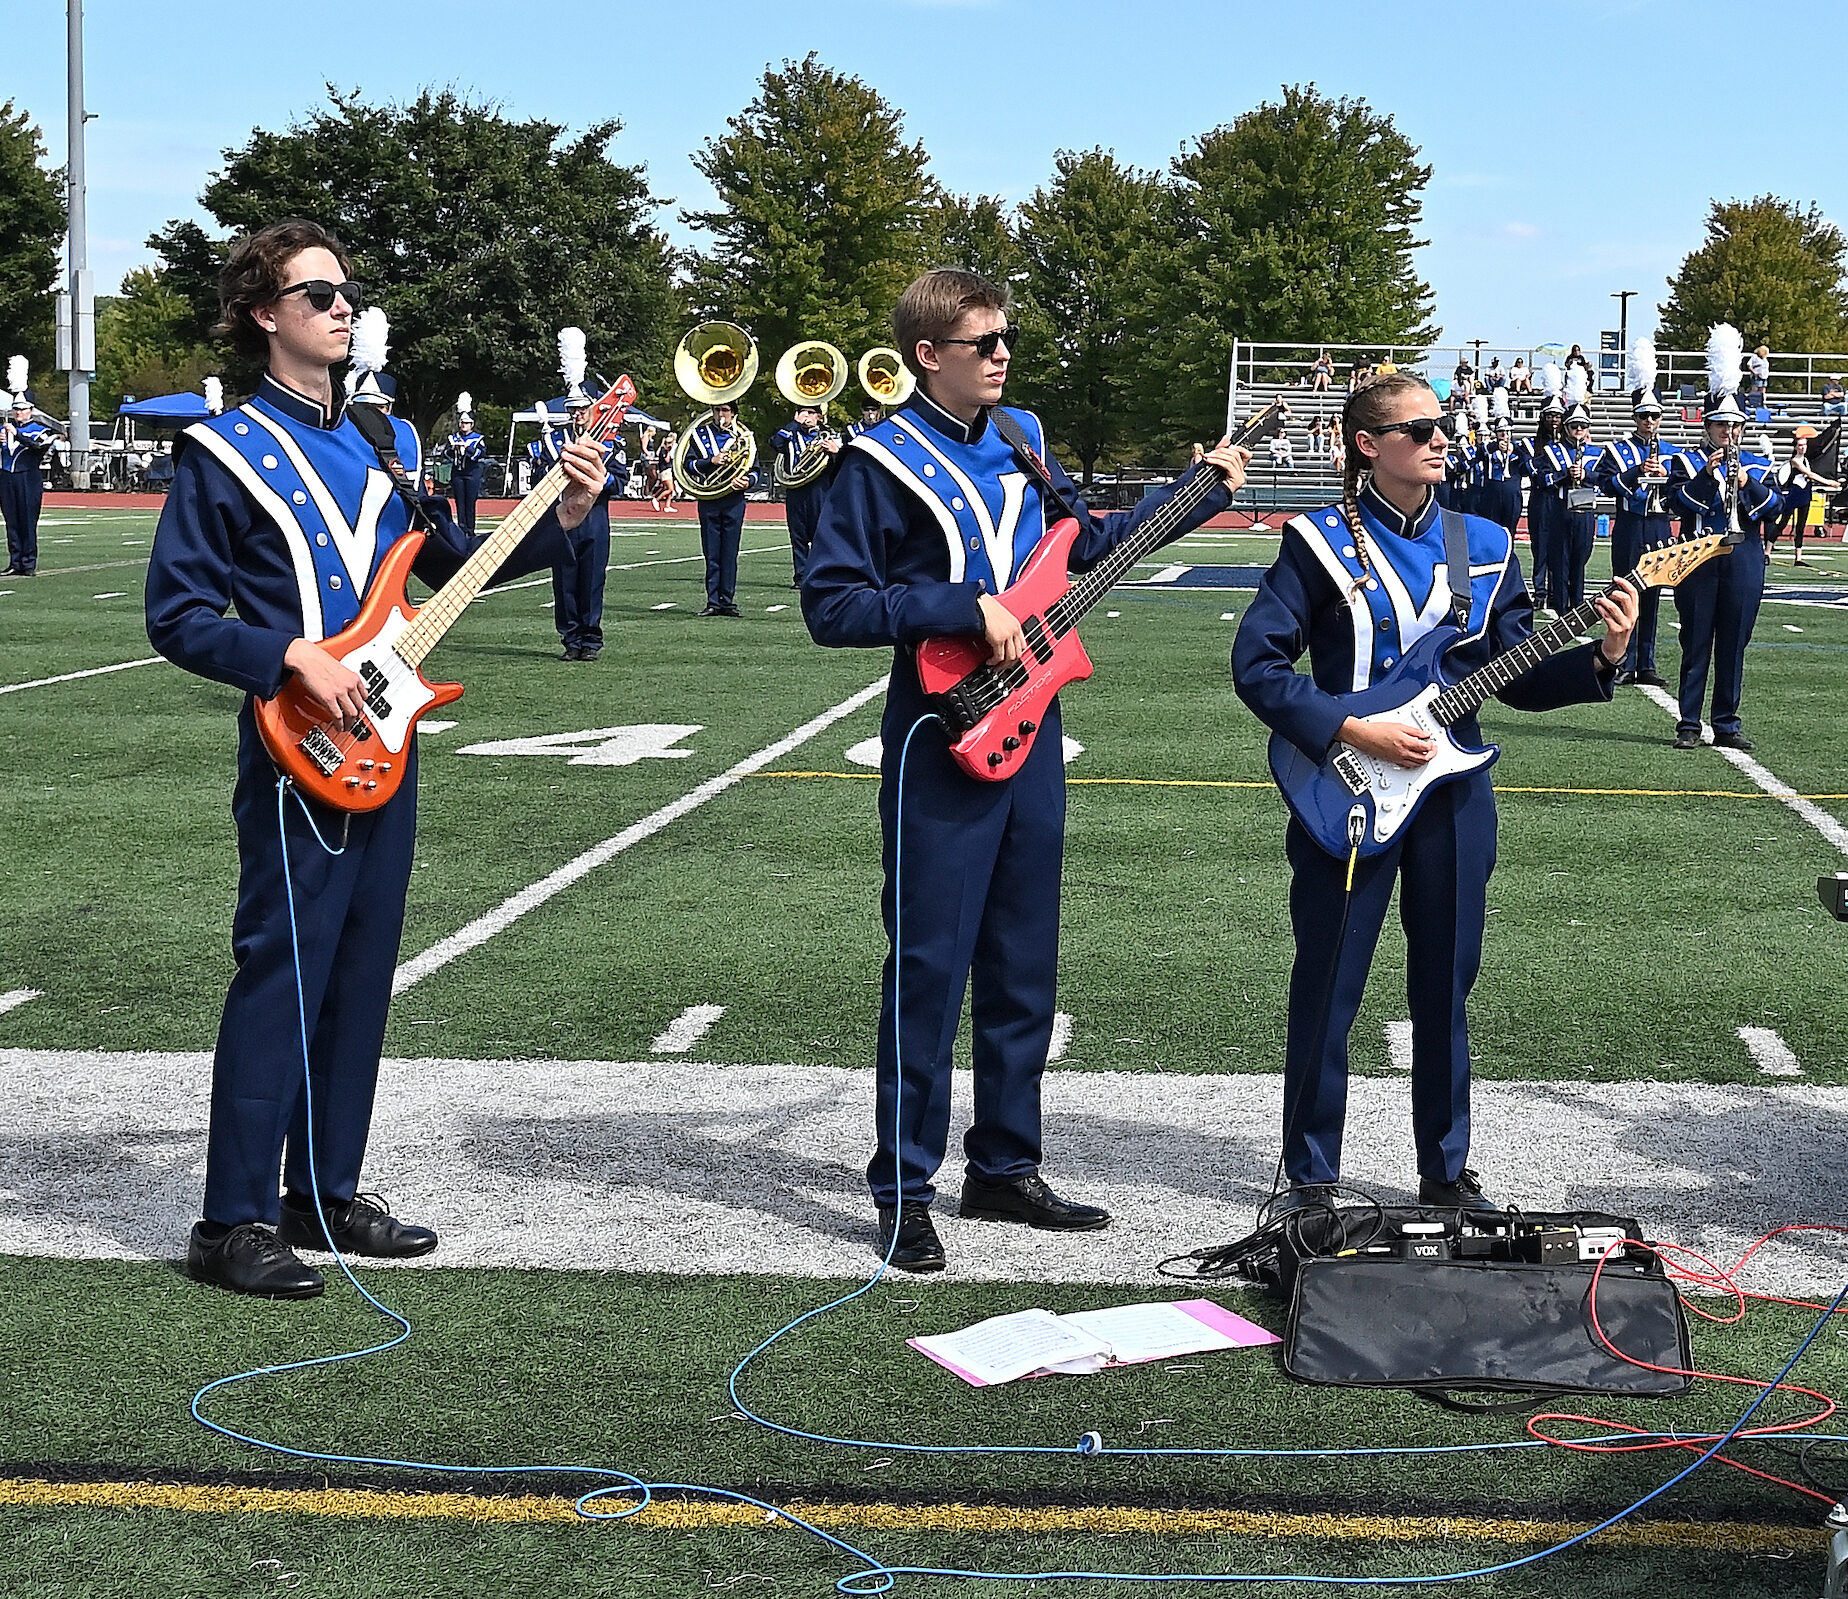 Members of marching band hold guitars on field